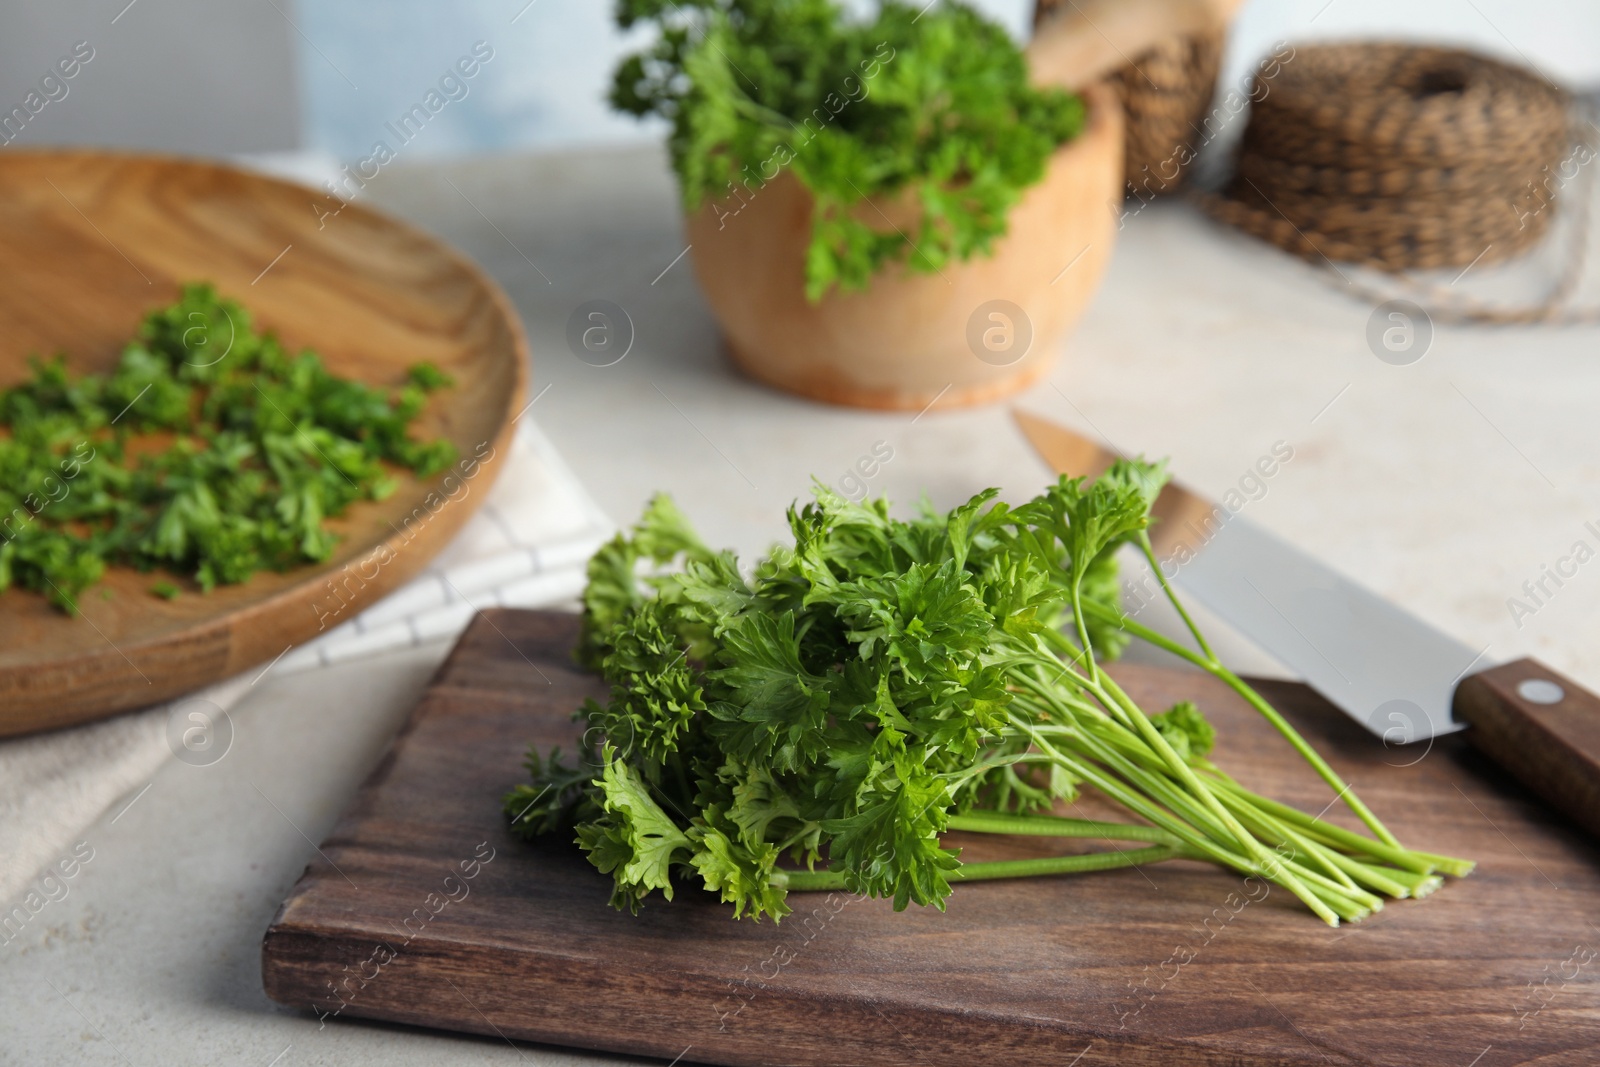 Photo of Wooden board with fresh green parsley on table